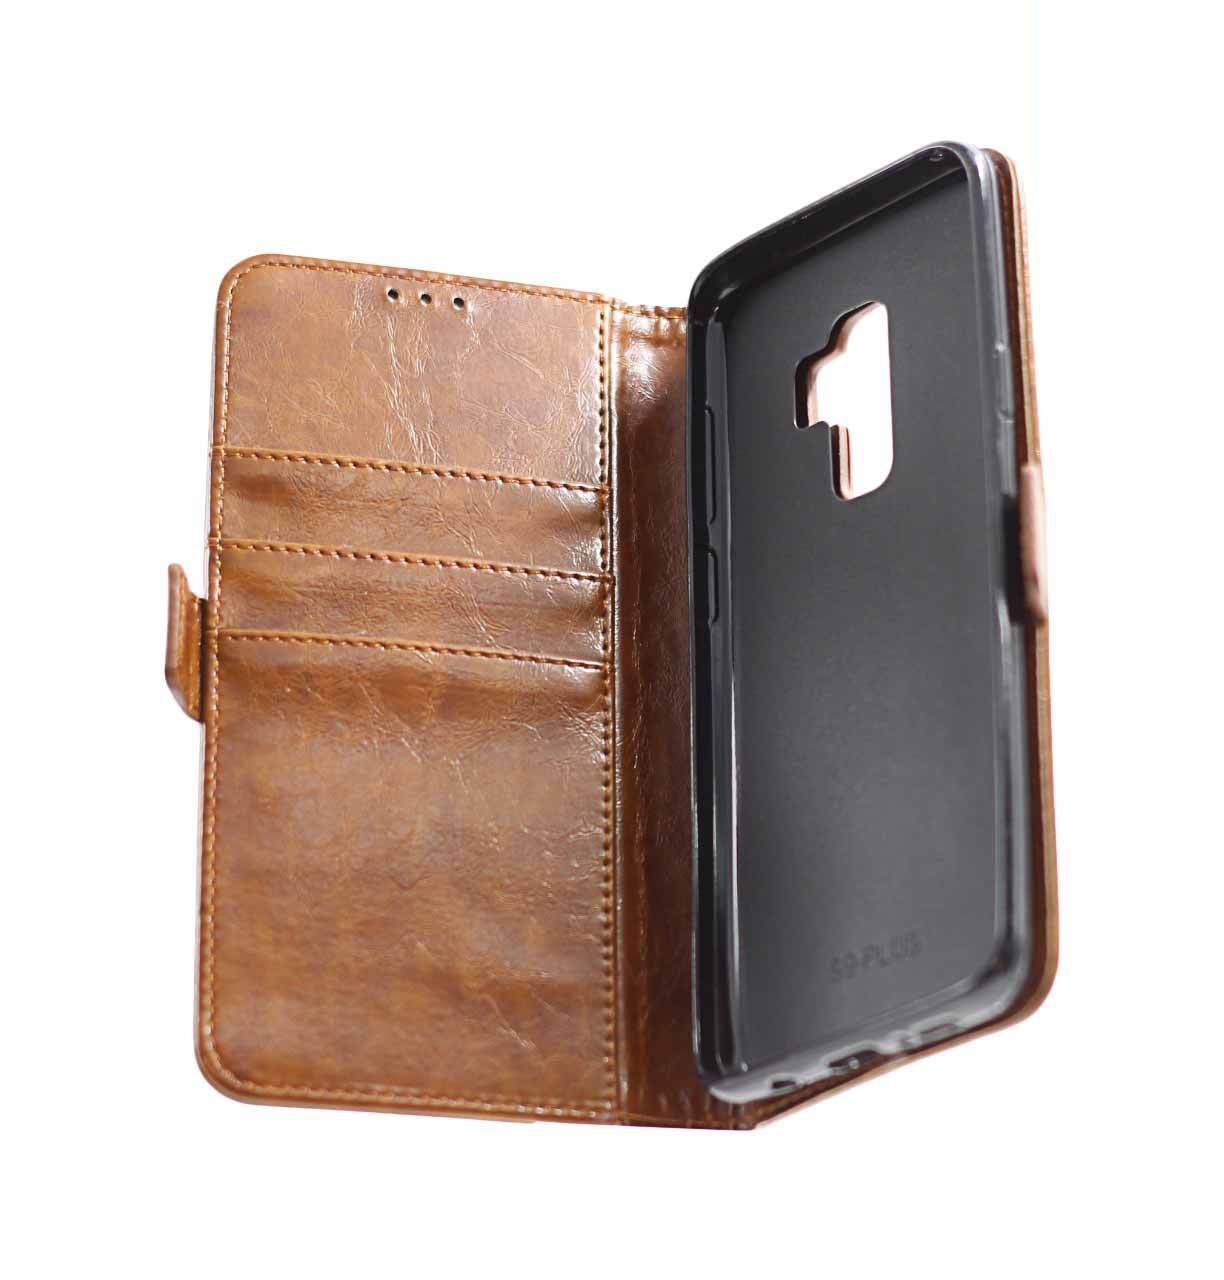 Samsung S9 Plus Leather Wallet Case Brown